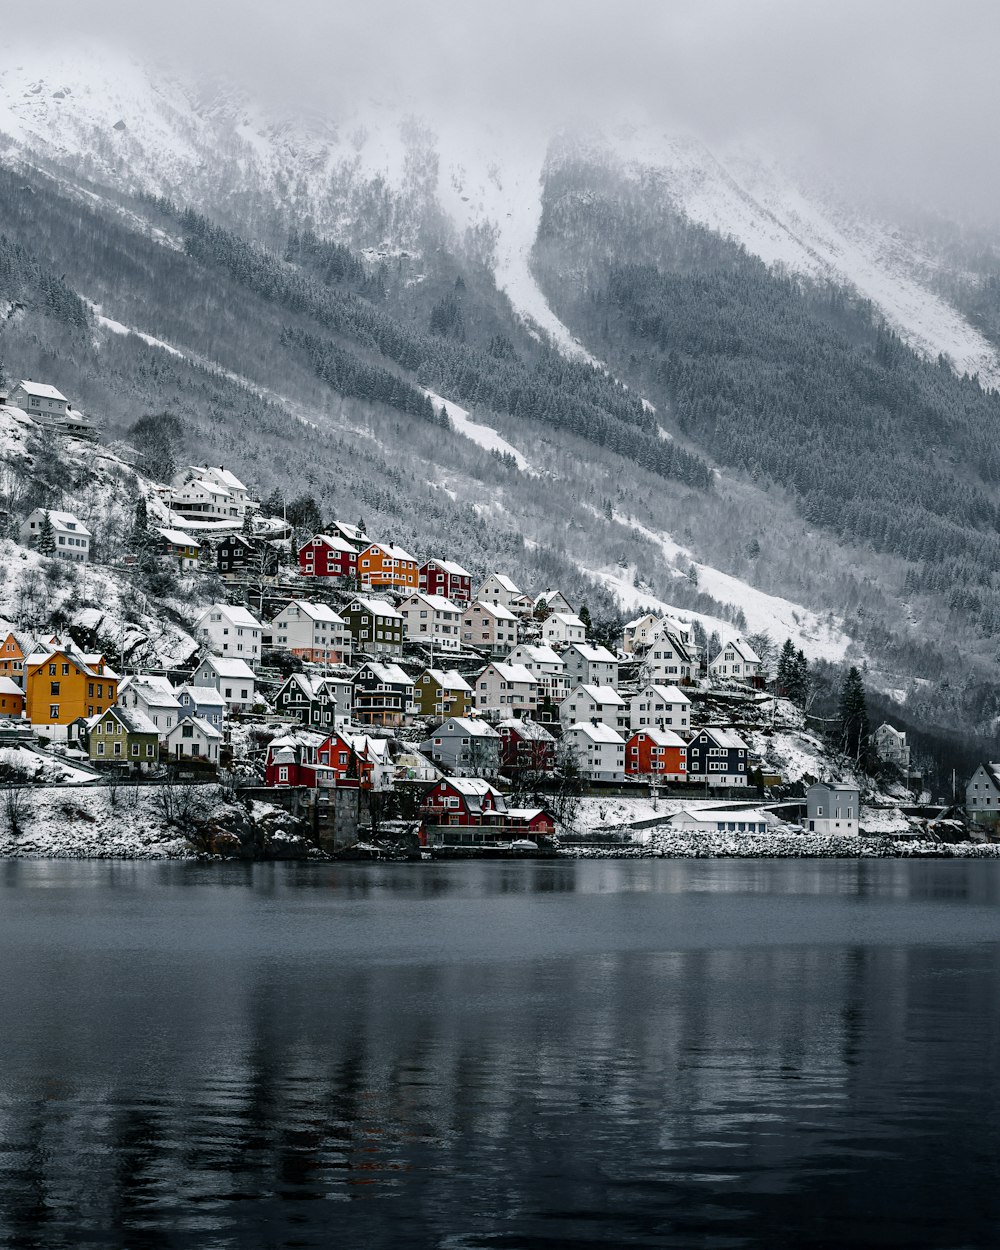 houses near body of water and snow covered mountain during daytime